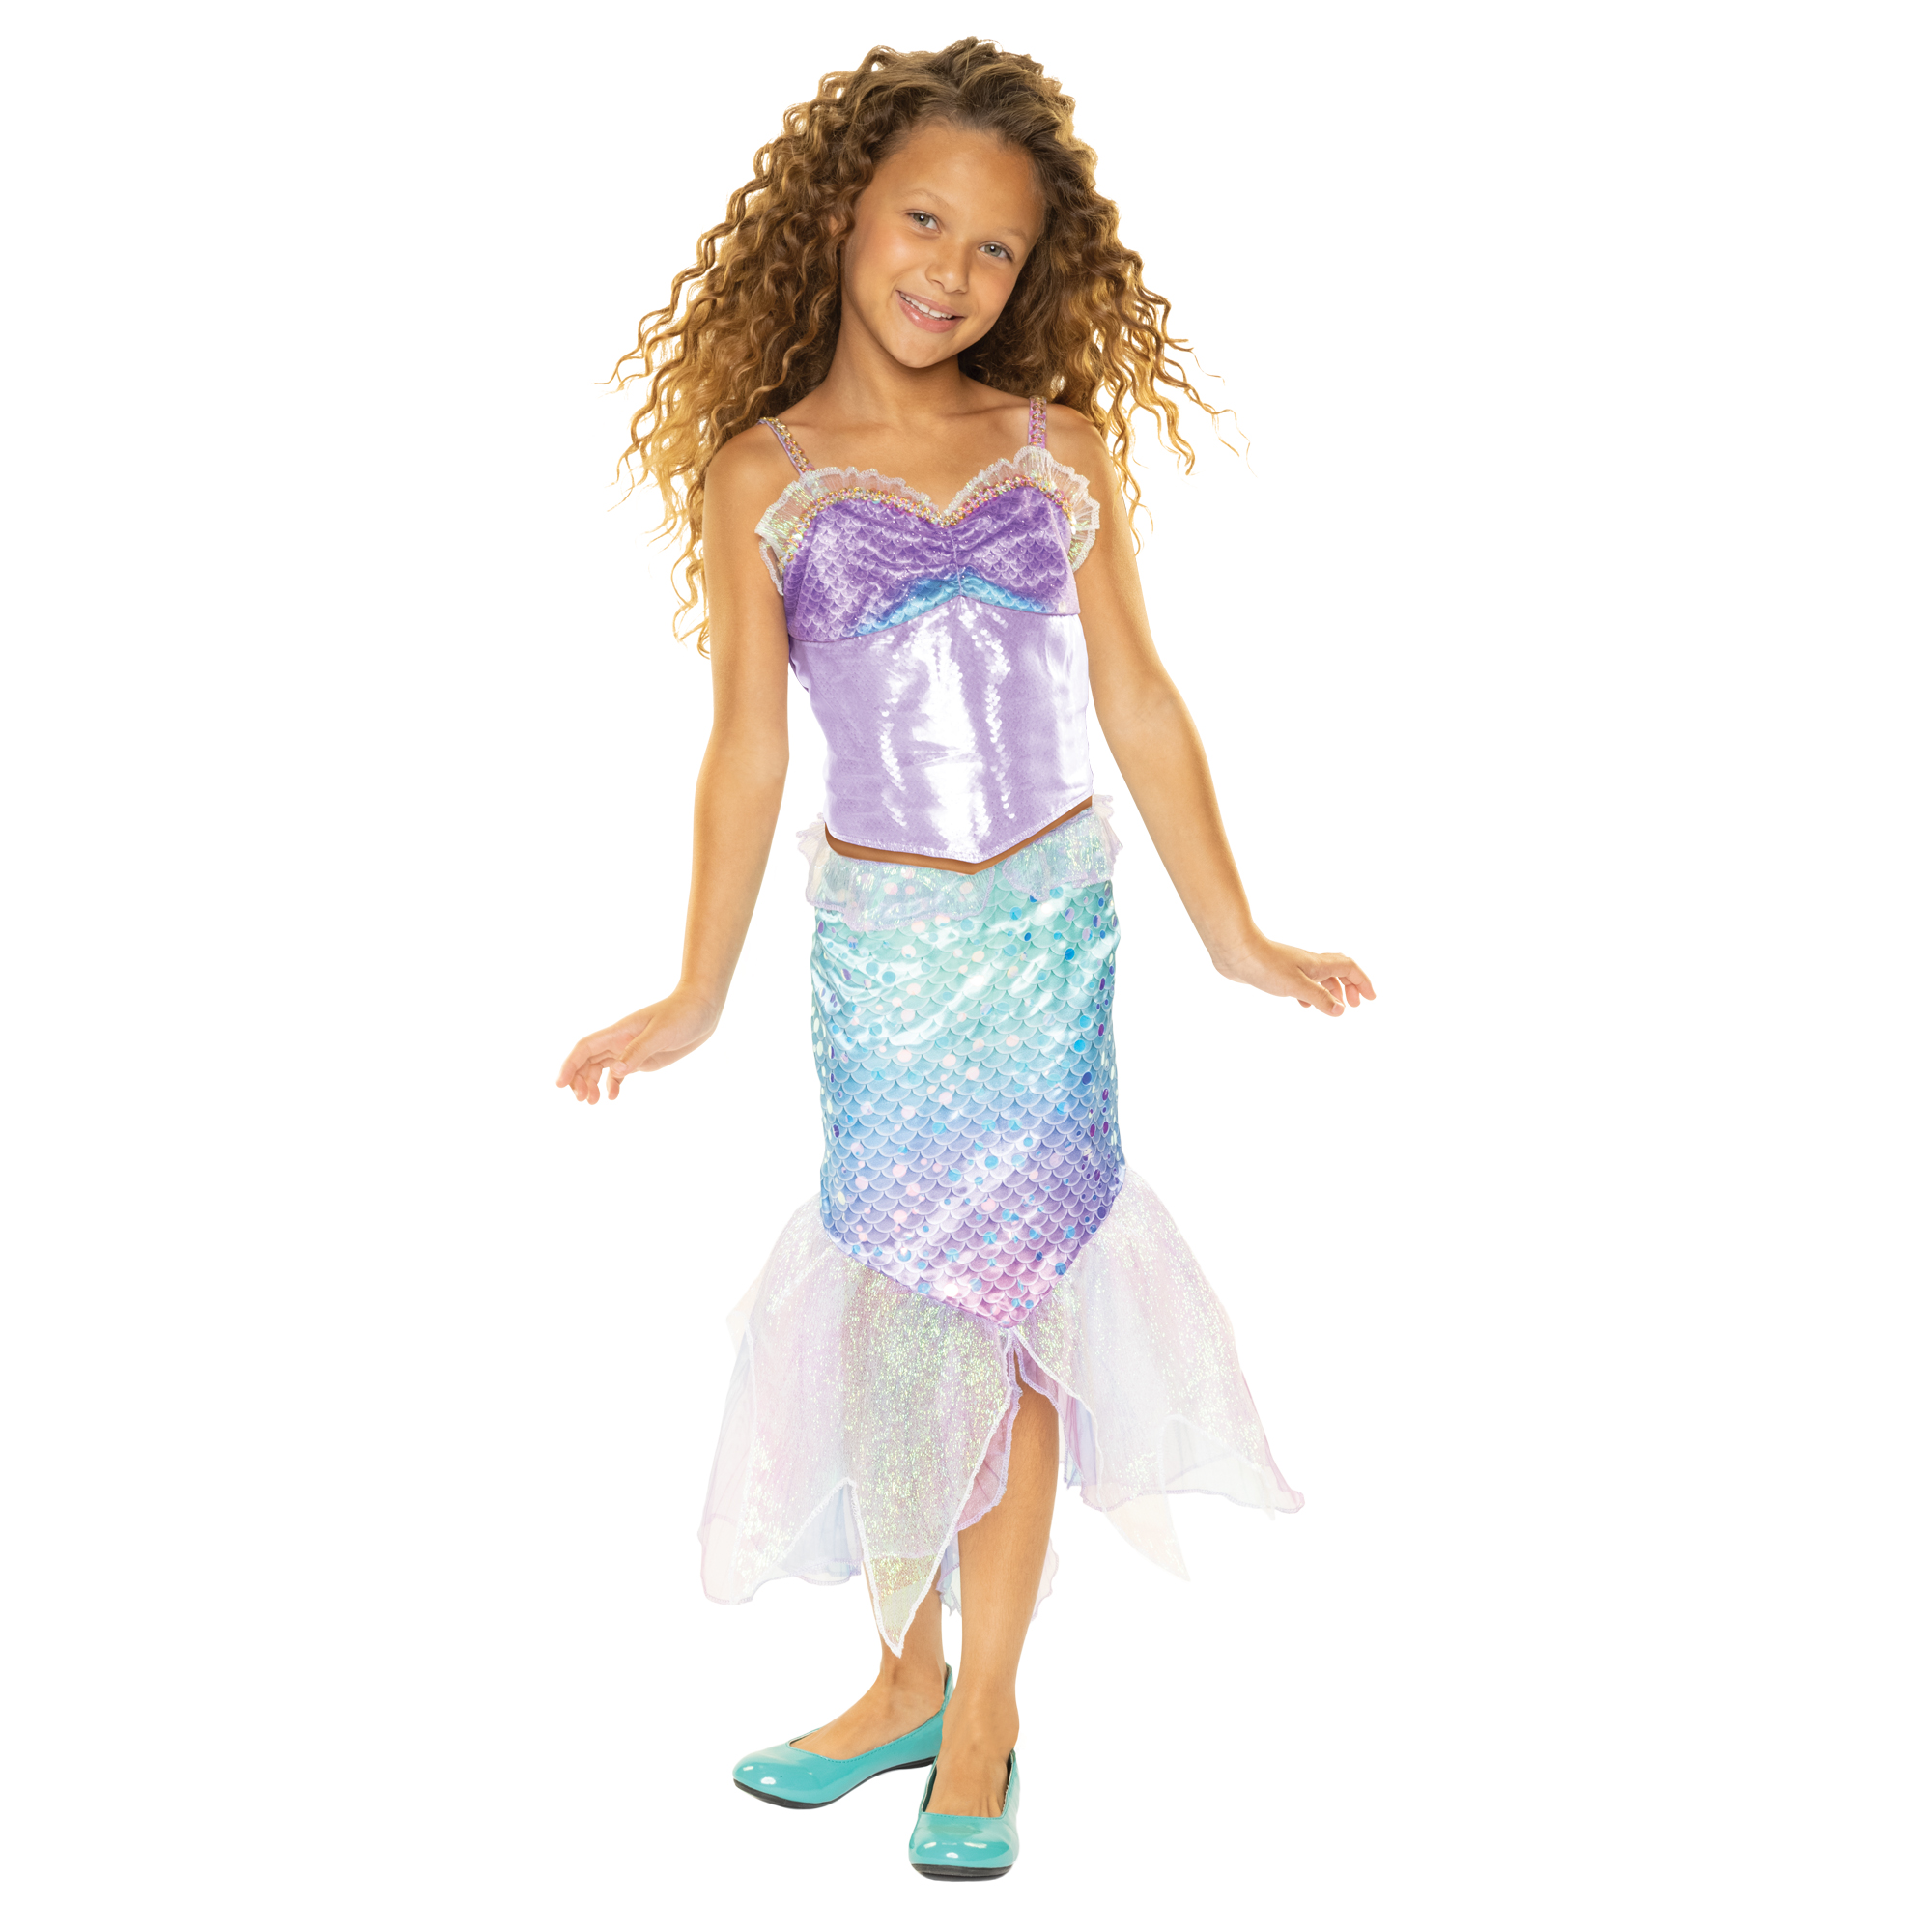 Disney Little Mermaid Ariel Two Piece Mermaid Deluxe Multicolored Fashion Dress Size 4 to 6 - image 5 of 8